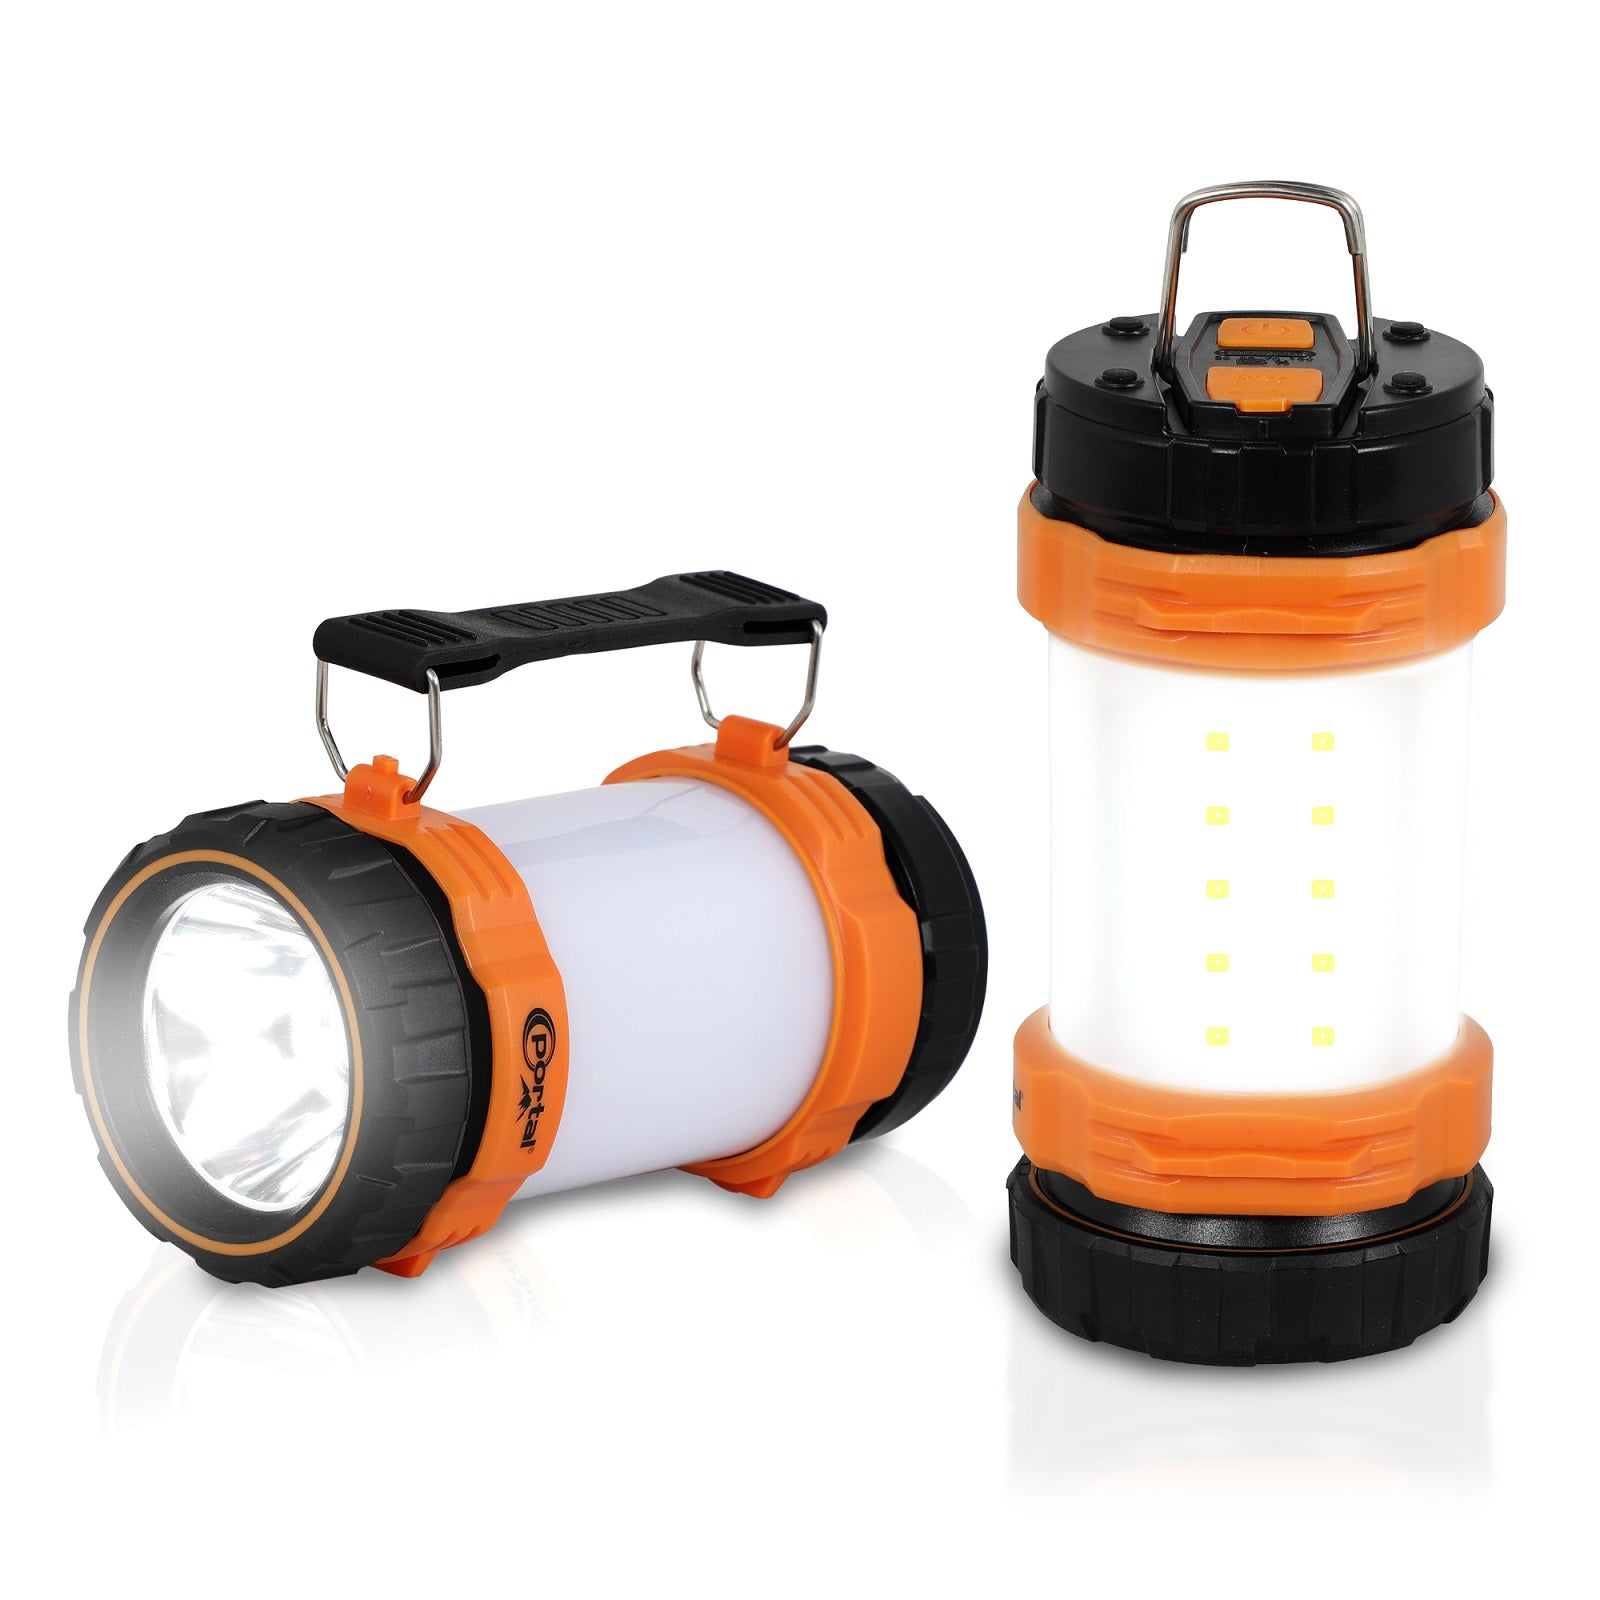 Led Camping Light Inflatable Folding Lamp Outdoor Waterproof Light